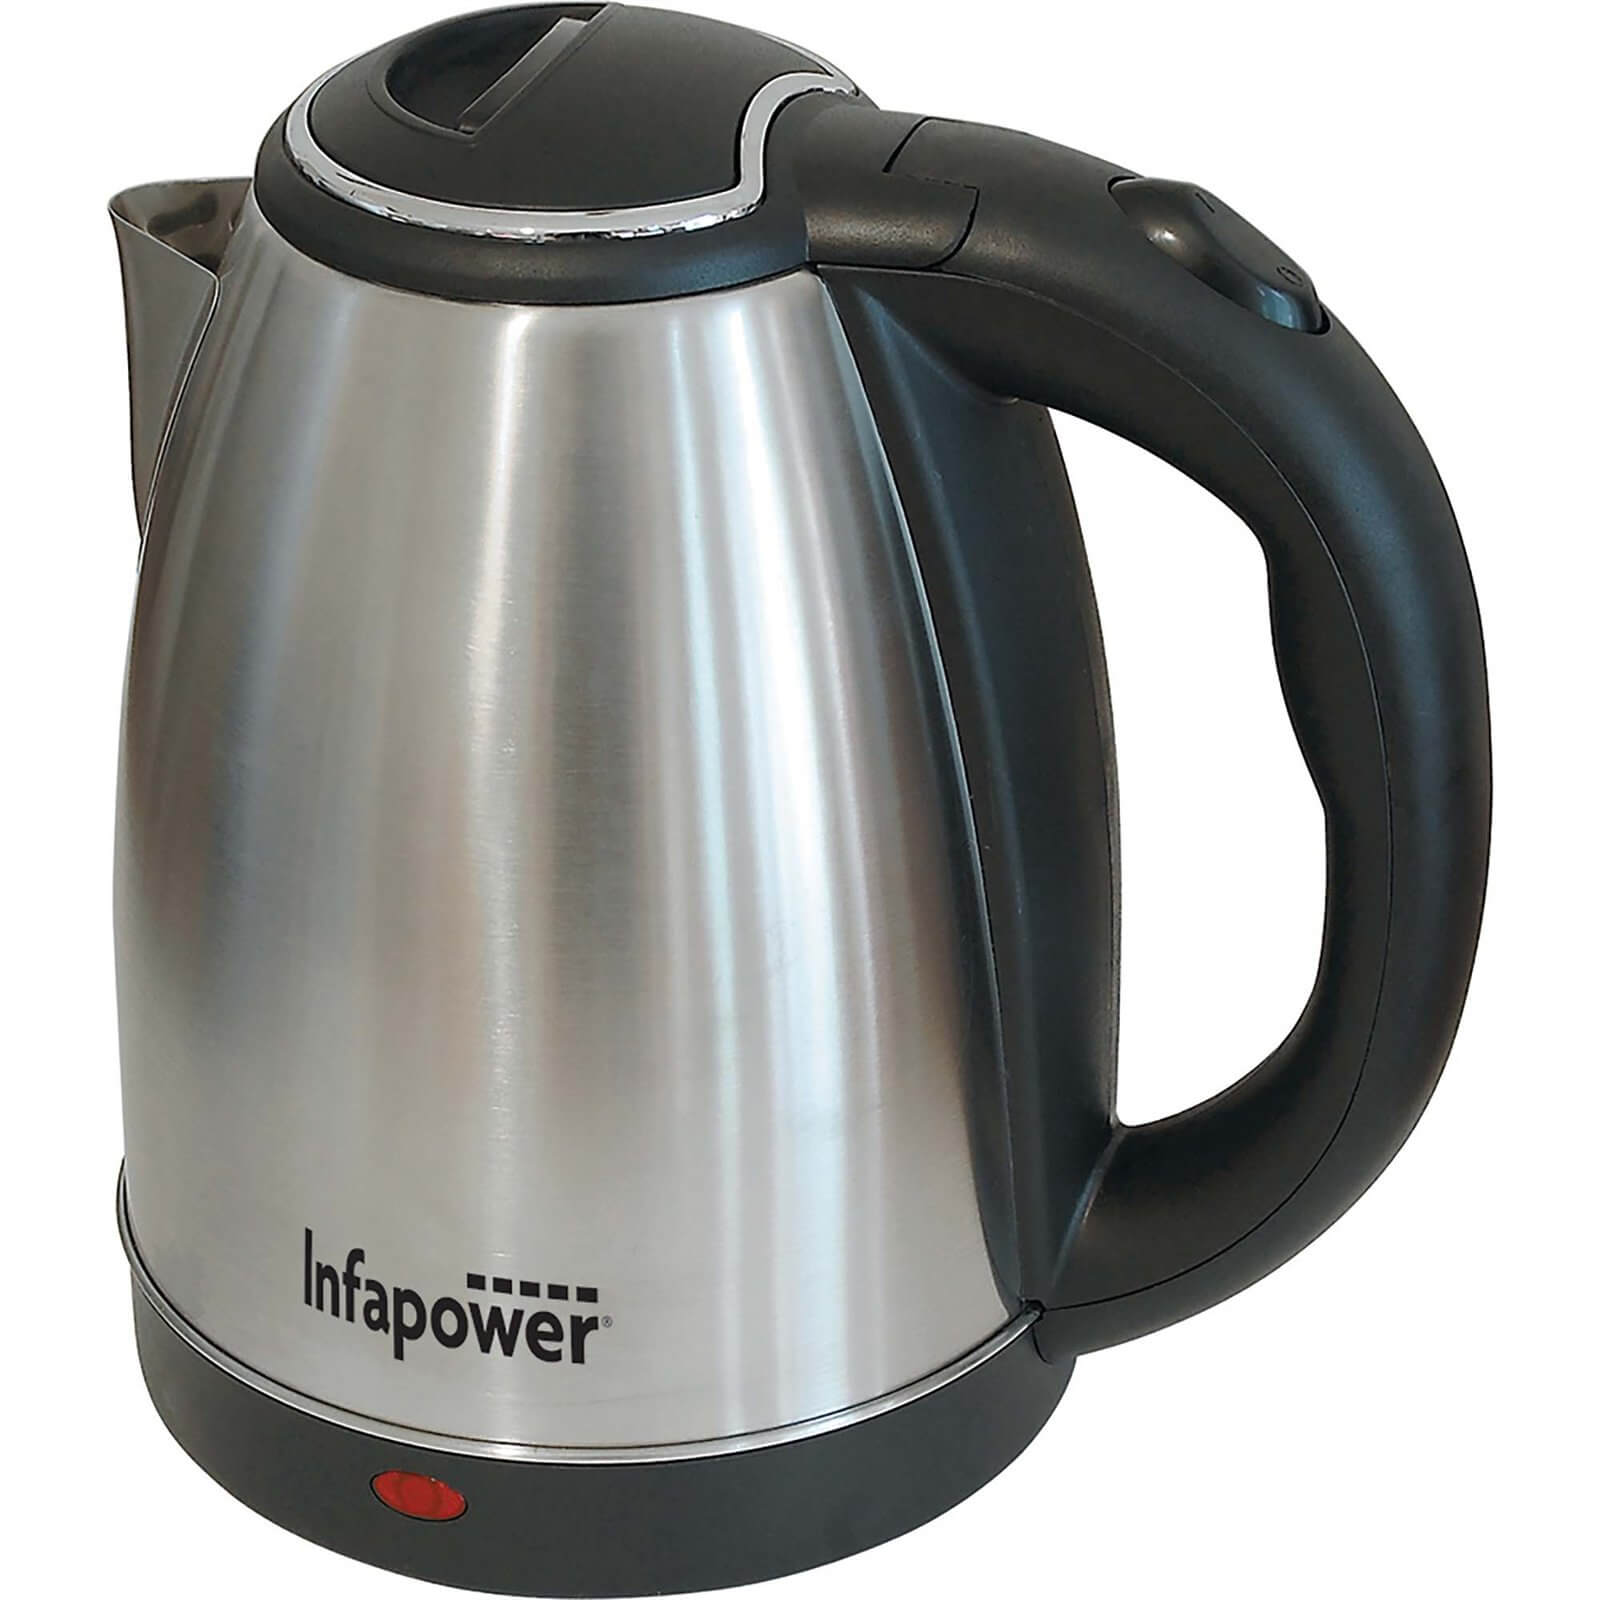 Infapower 1.8L Cordless Kettle - Stainless Steel